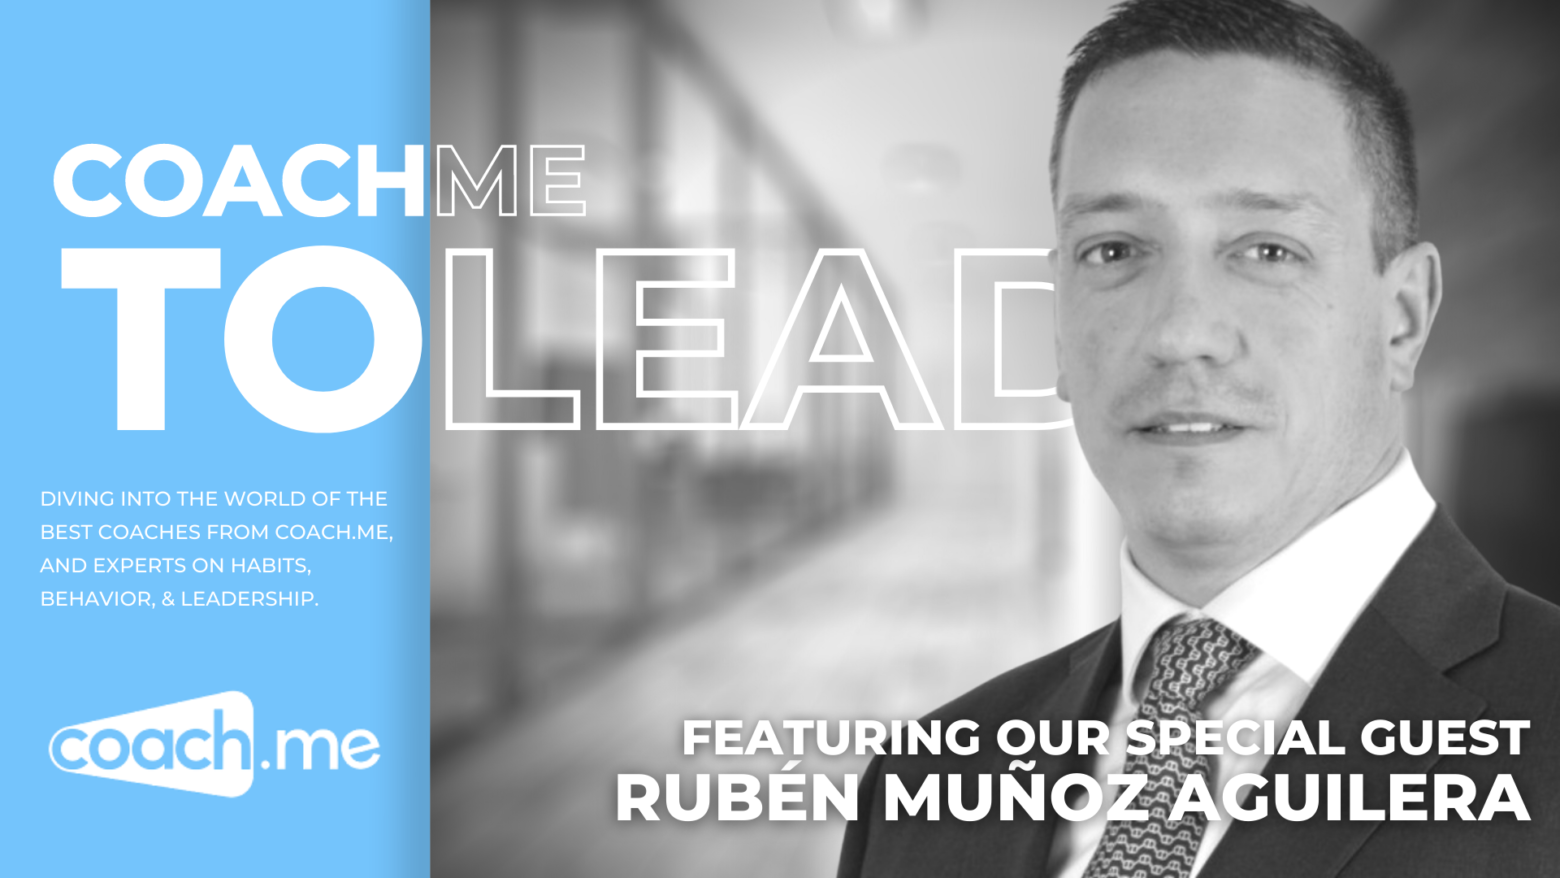 Ruben Munoz Aguilera on family and business